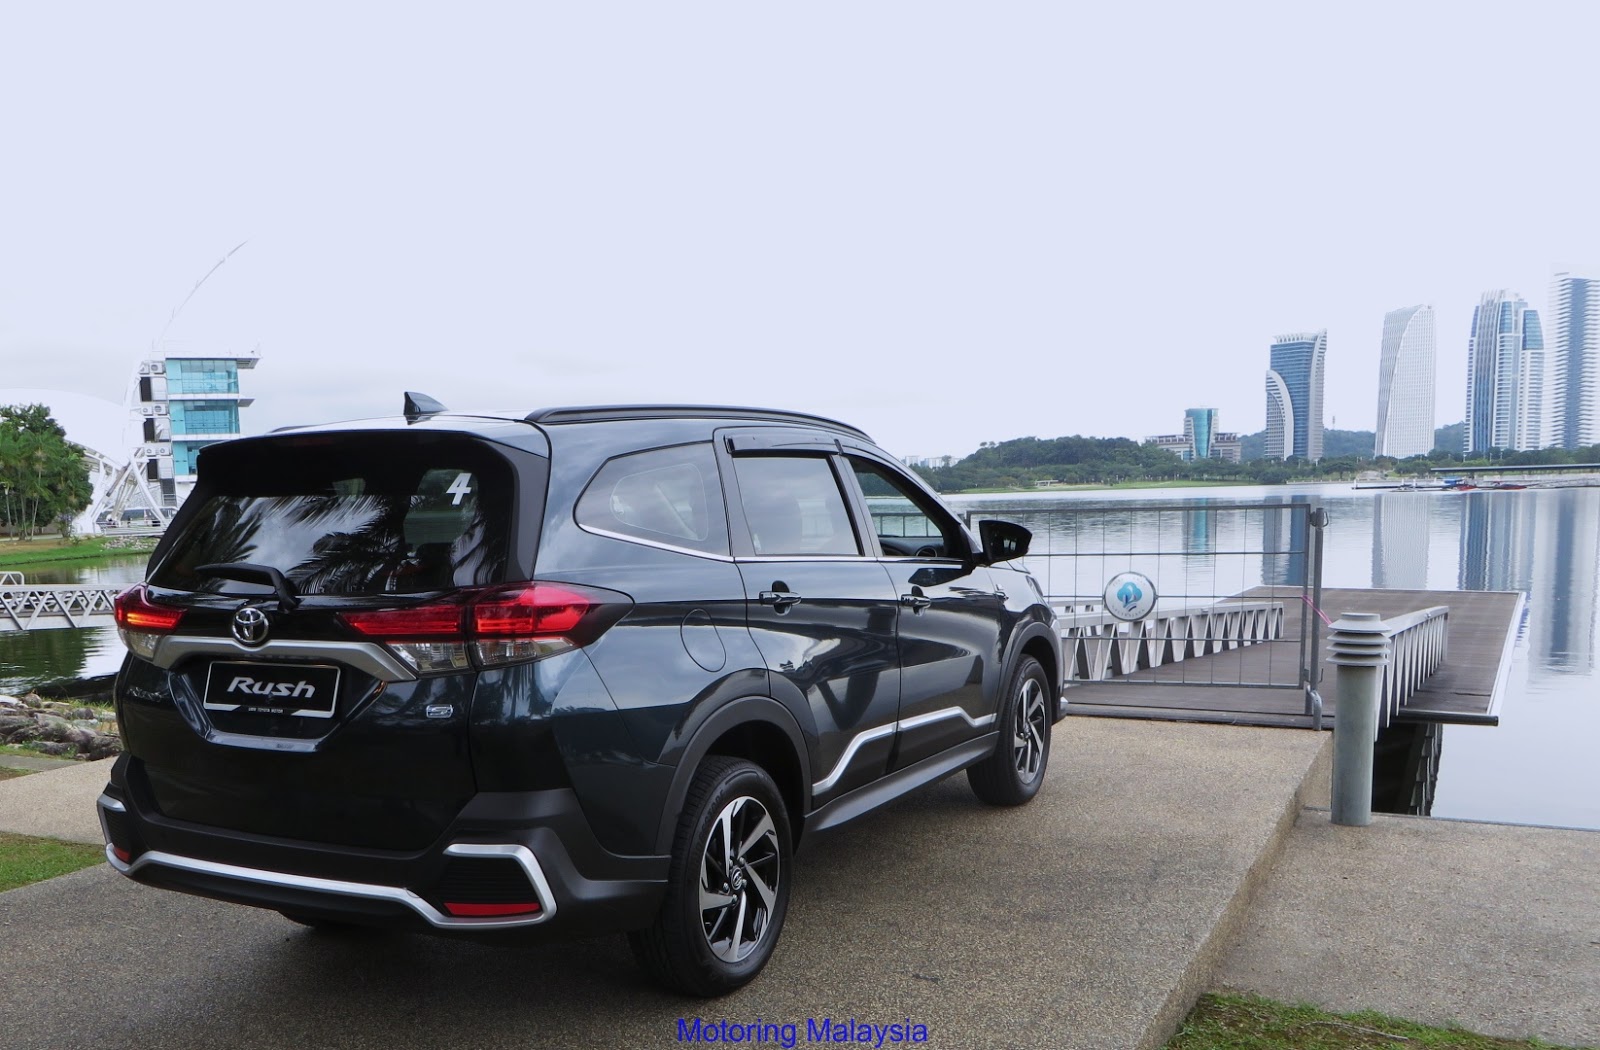 Motoring Malaysia Test Drive First Impressions Of The New 2019 Toyota Rush 1 5 S